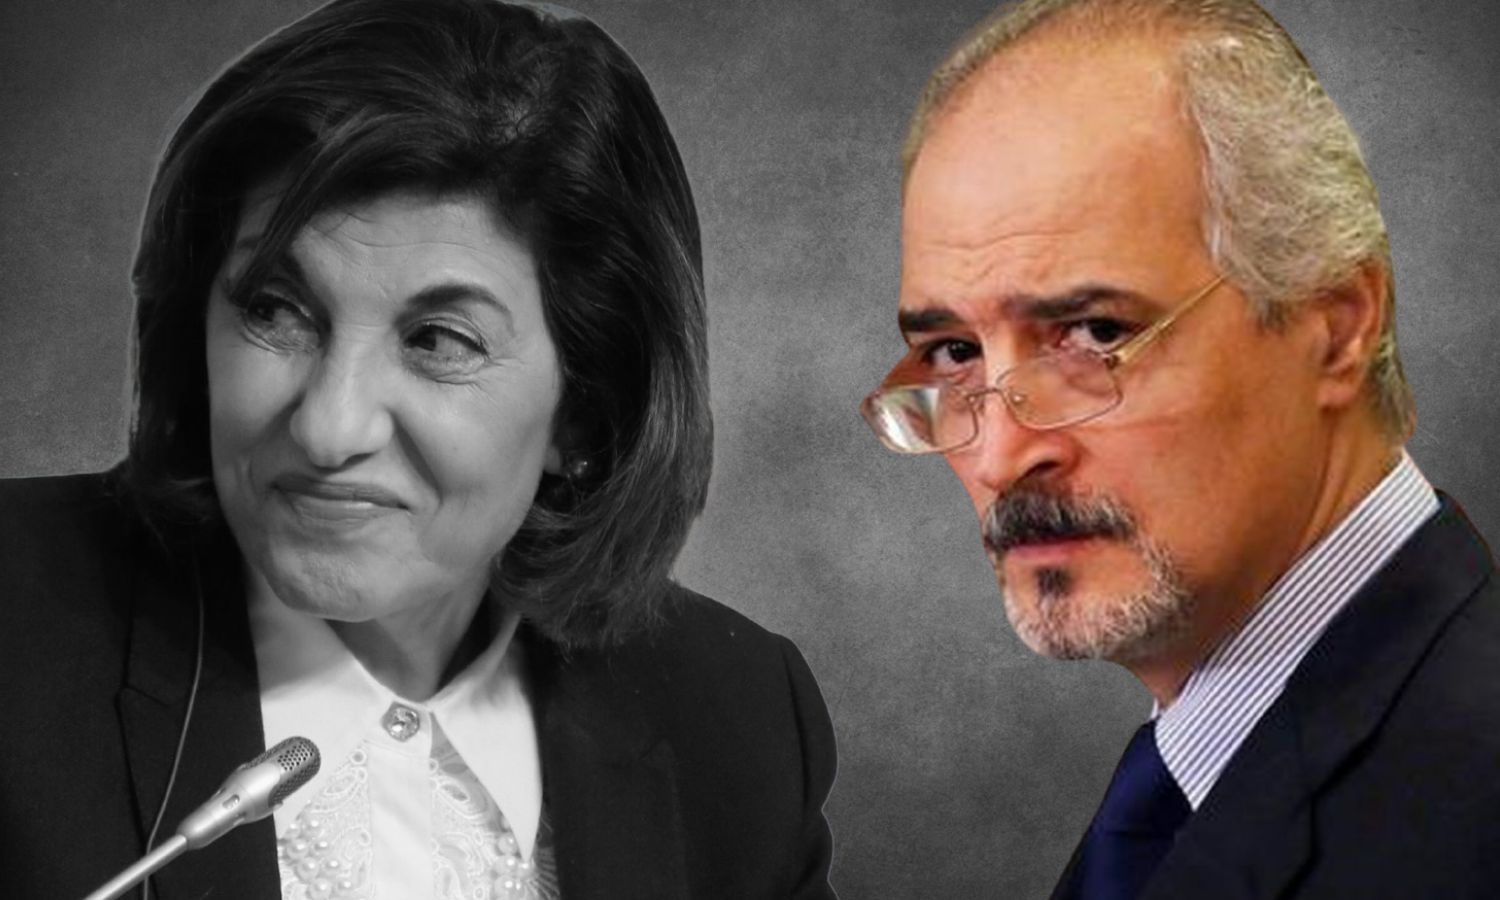 Bashar al-Jaafari, Deputy Minister of Foreign Affairs, and Bouthaina Shaaban, Media and Political Adviser of the Syrian regime president (edited by Enab Baladi)